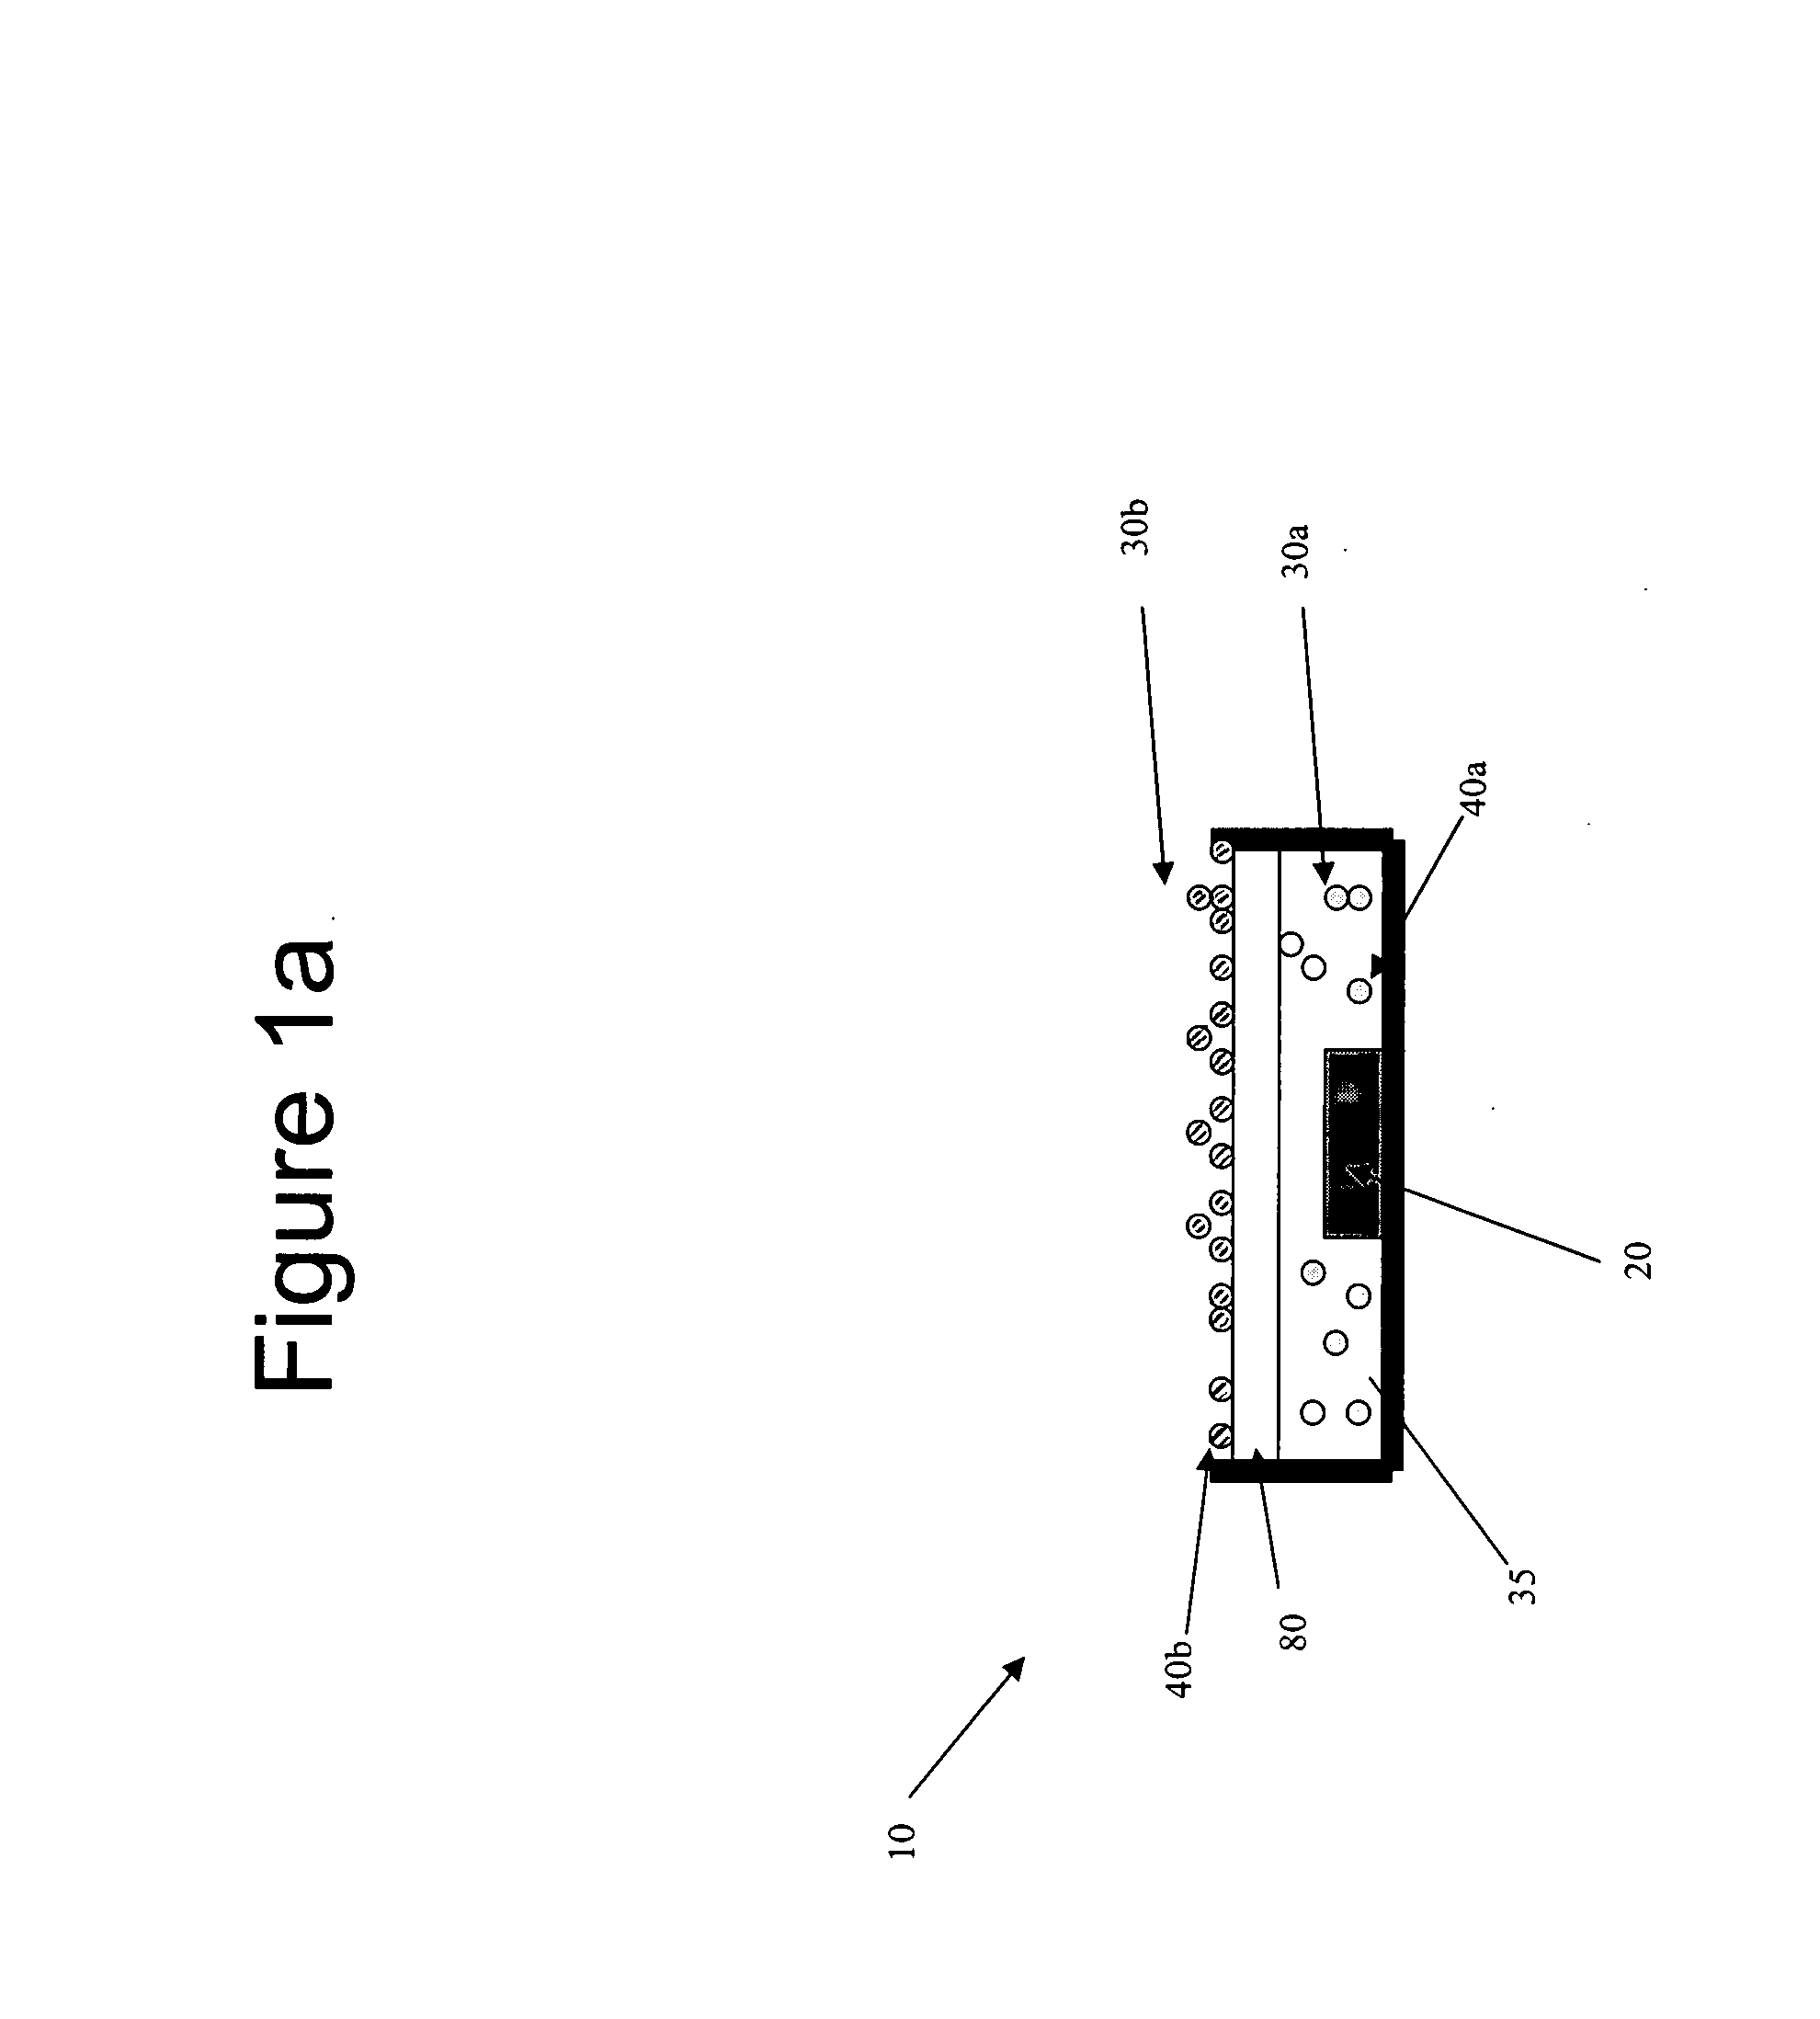 Solid state lighting devices comprising quantum dots